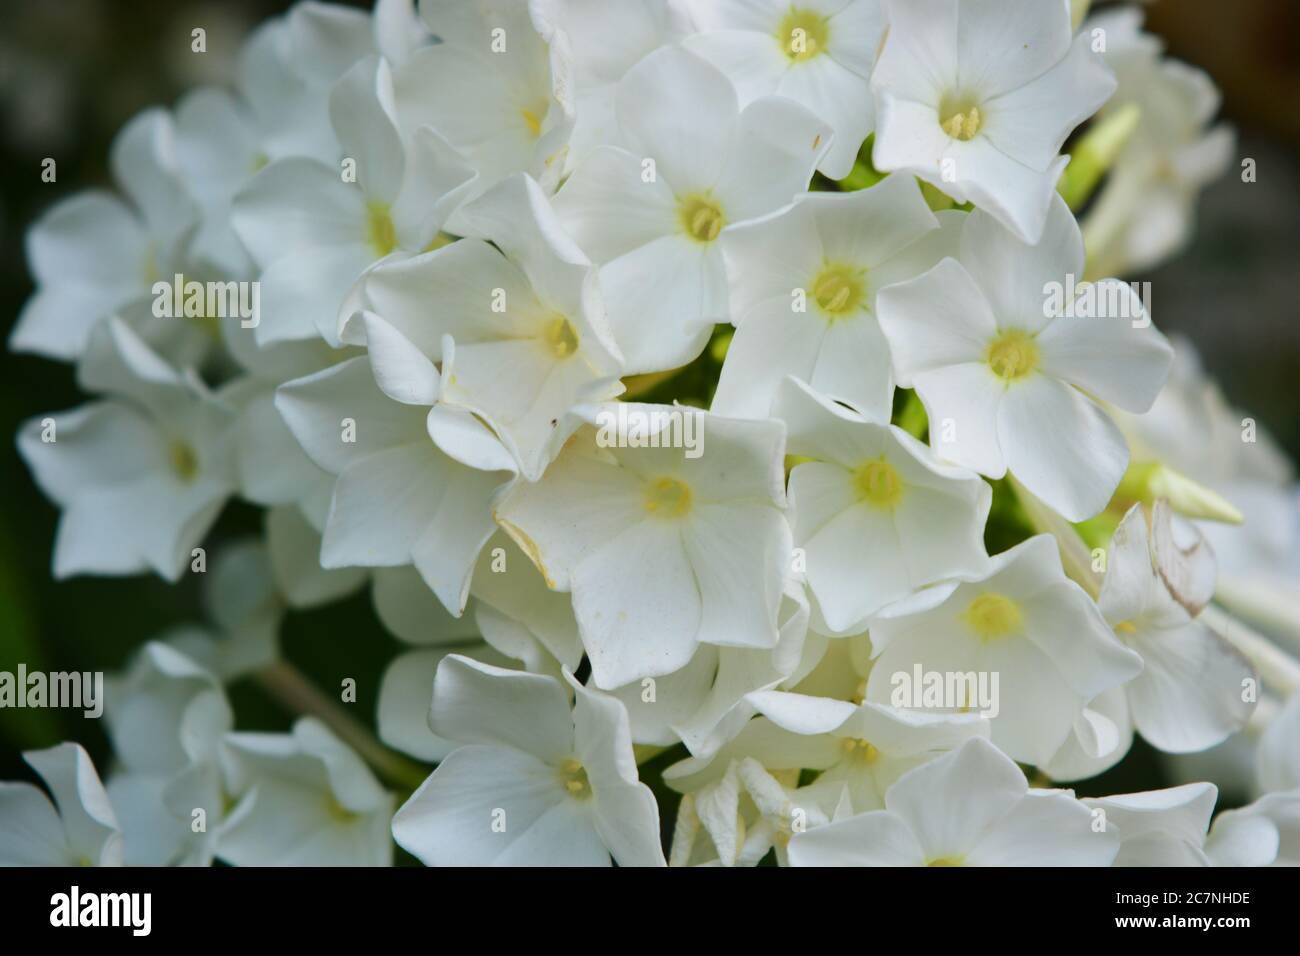 White bright and colorful street flowers, white phlox that grows in the garden. Stock Photo